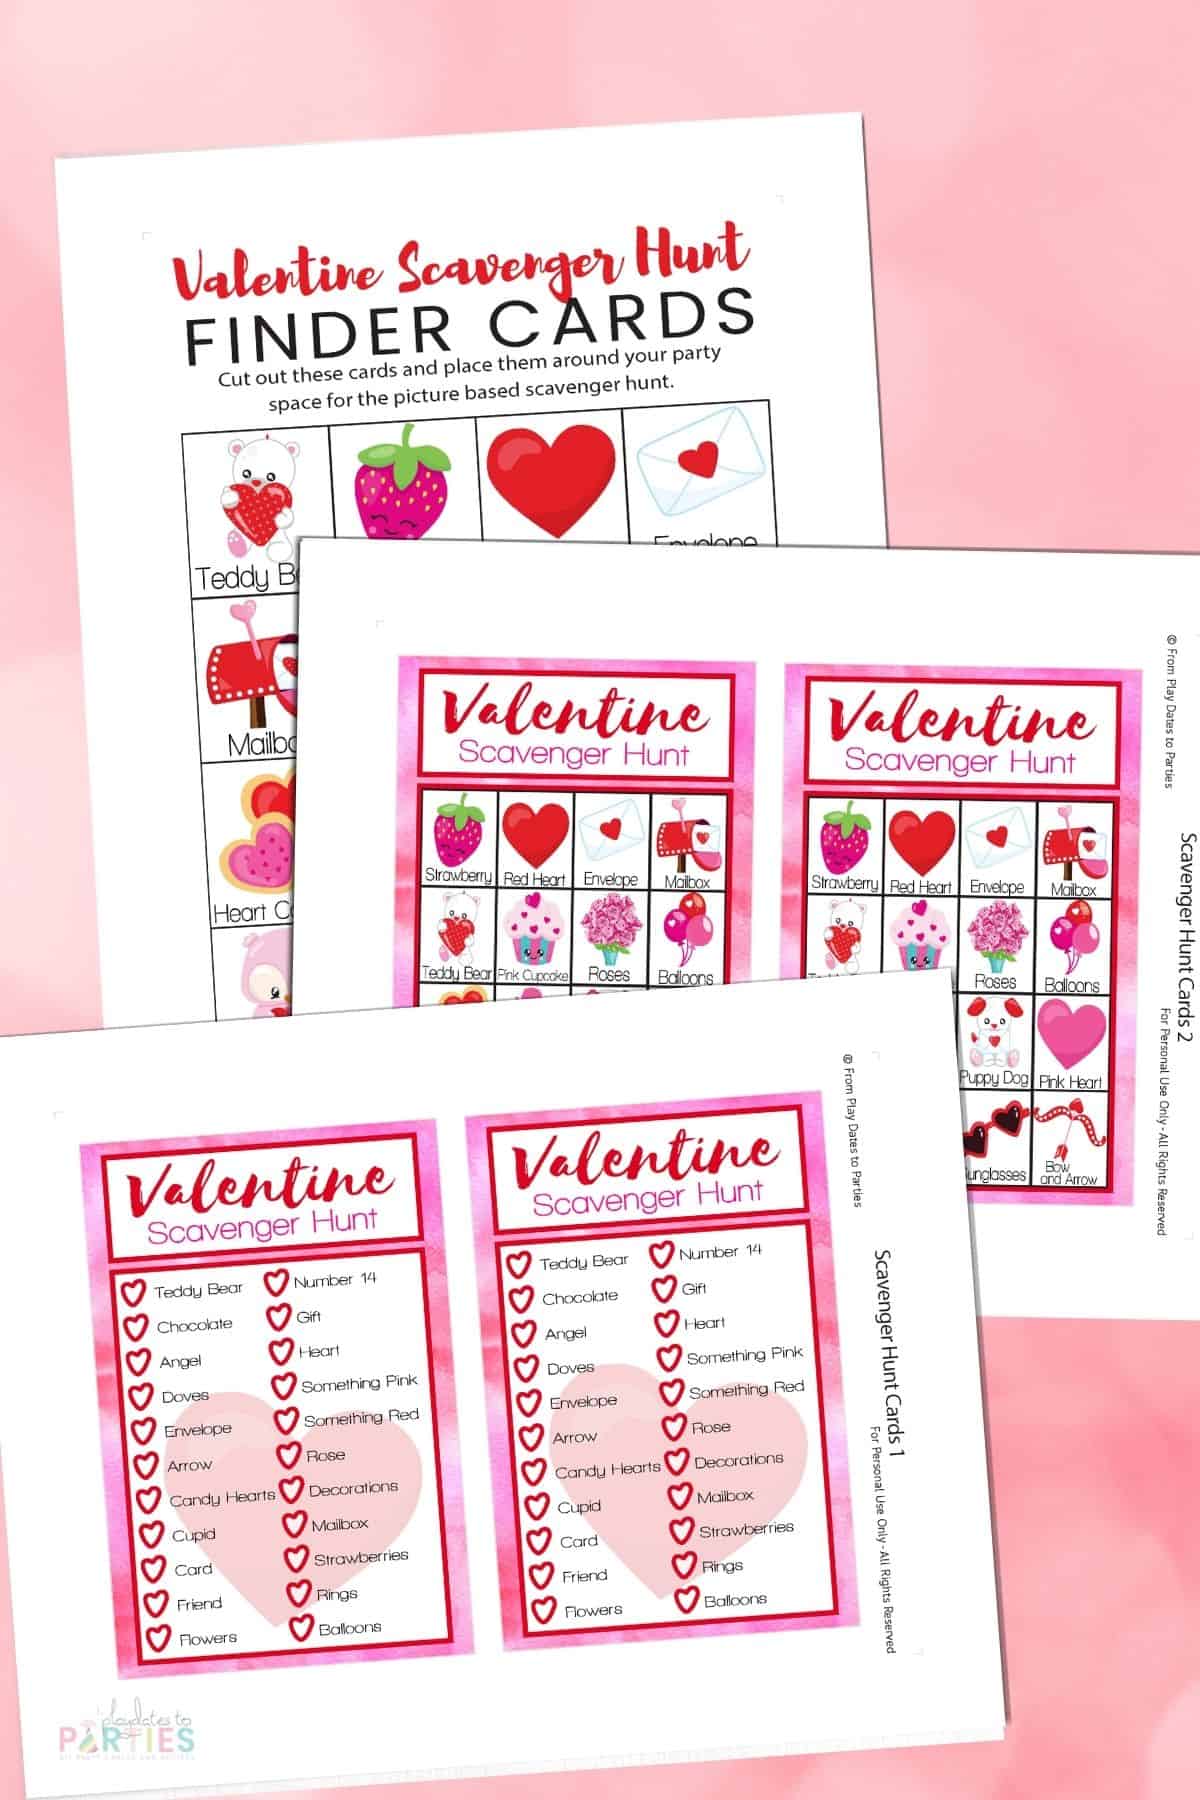 Mockup of three scavenger hunt pages on a pink background.